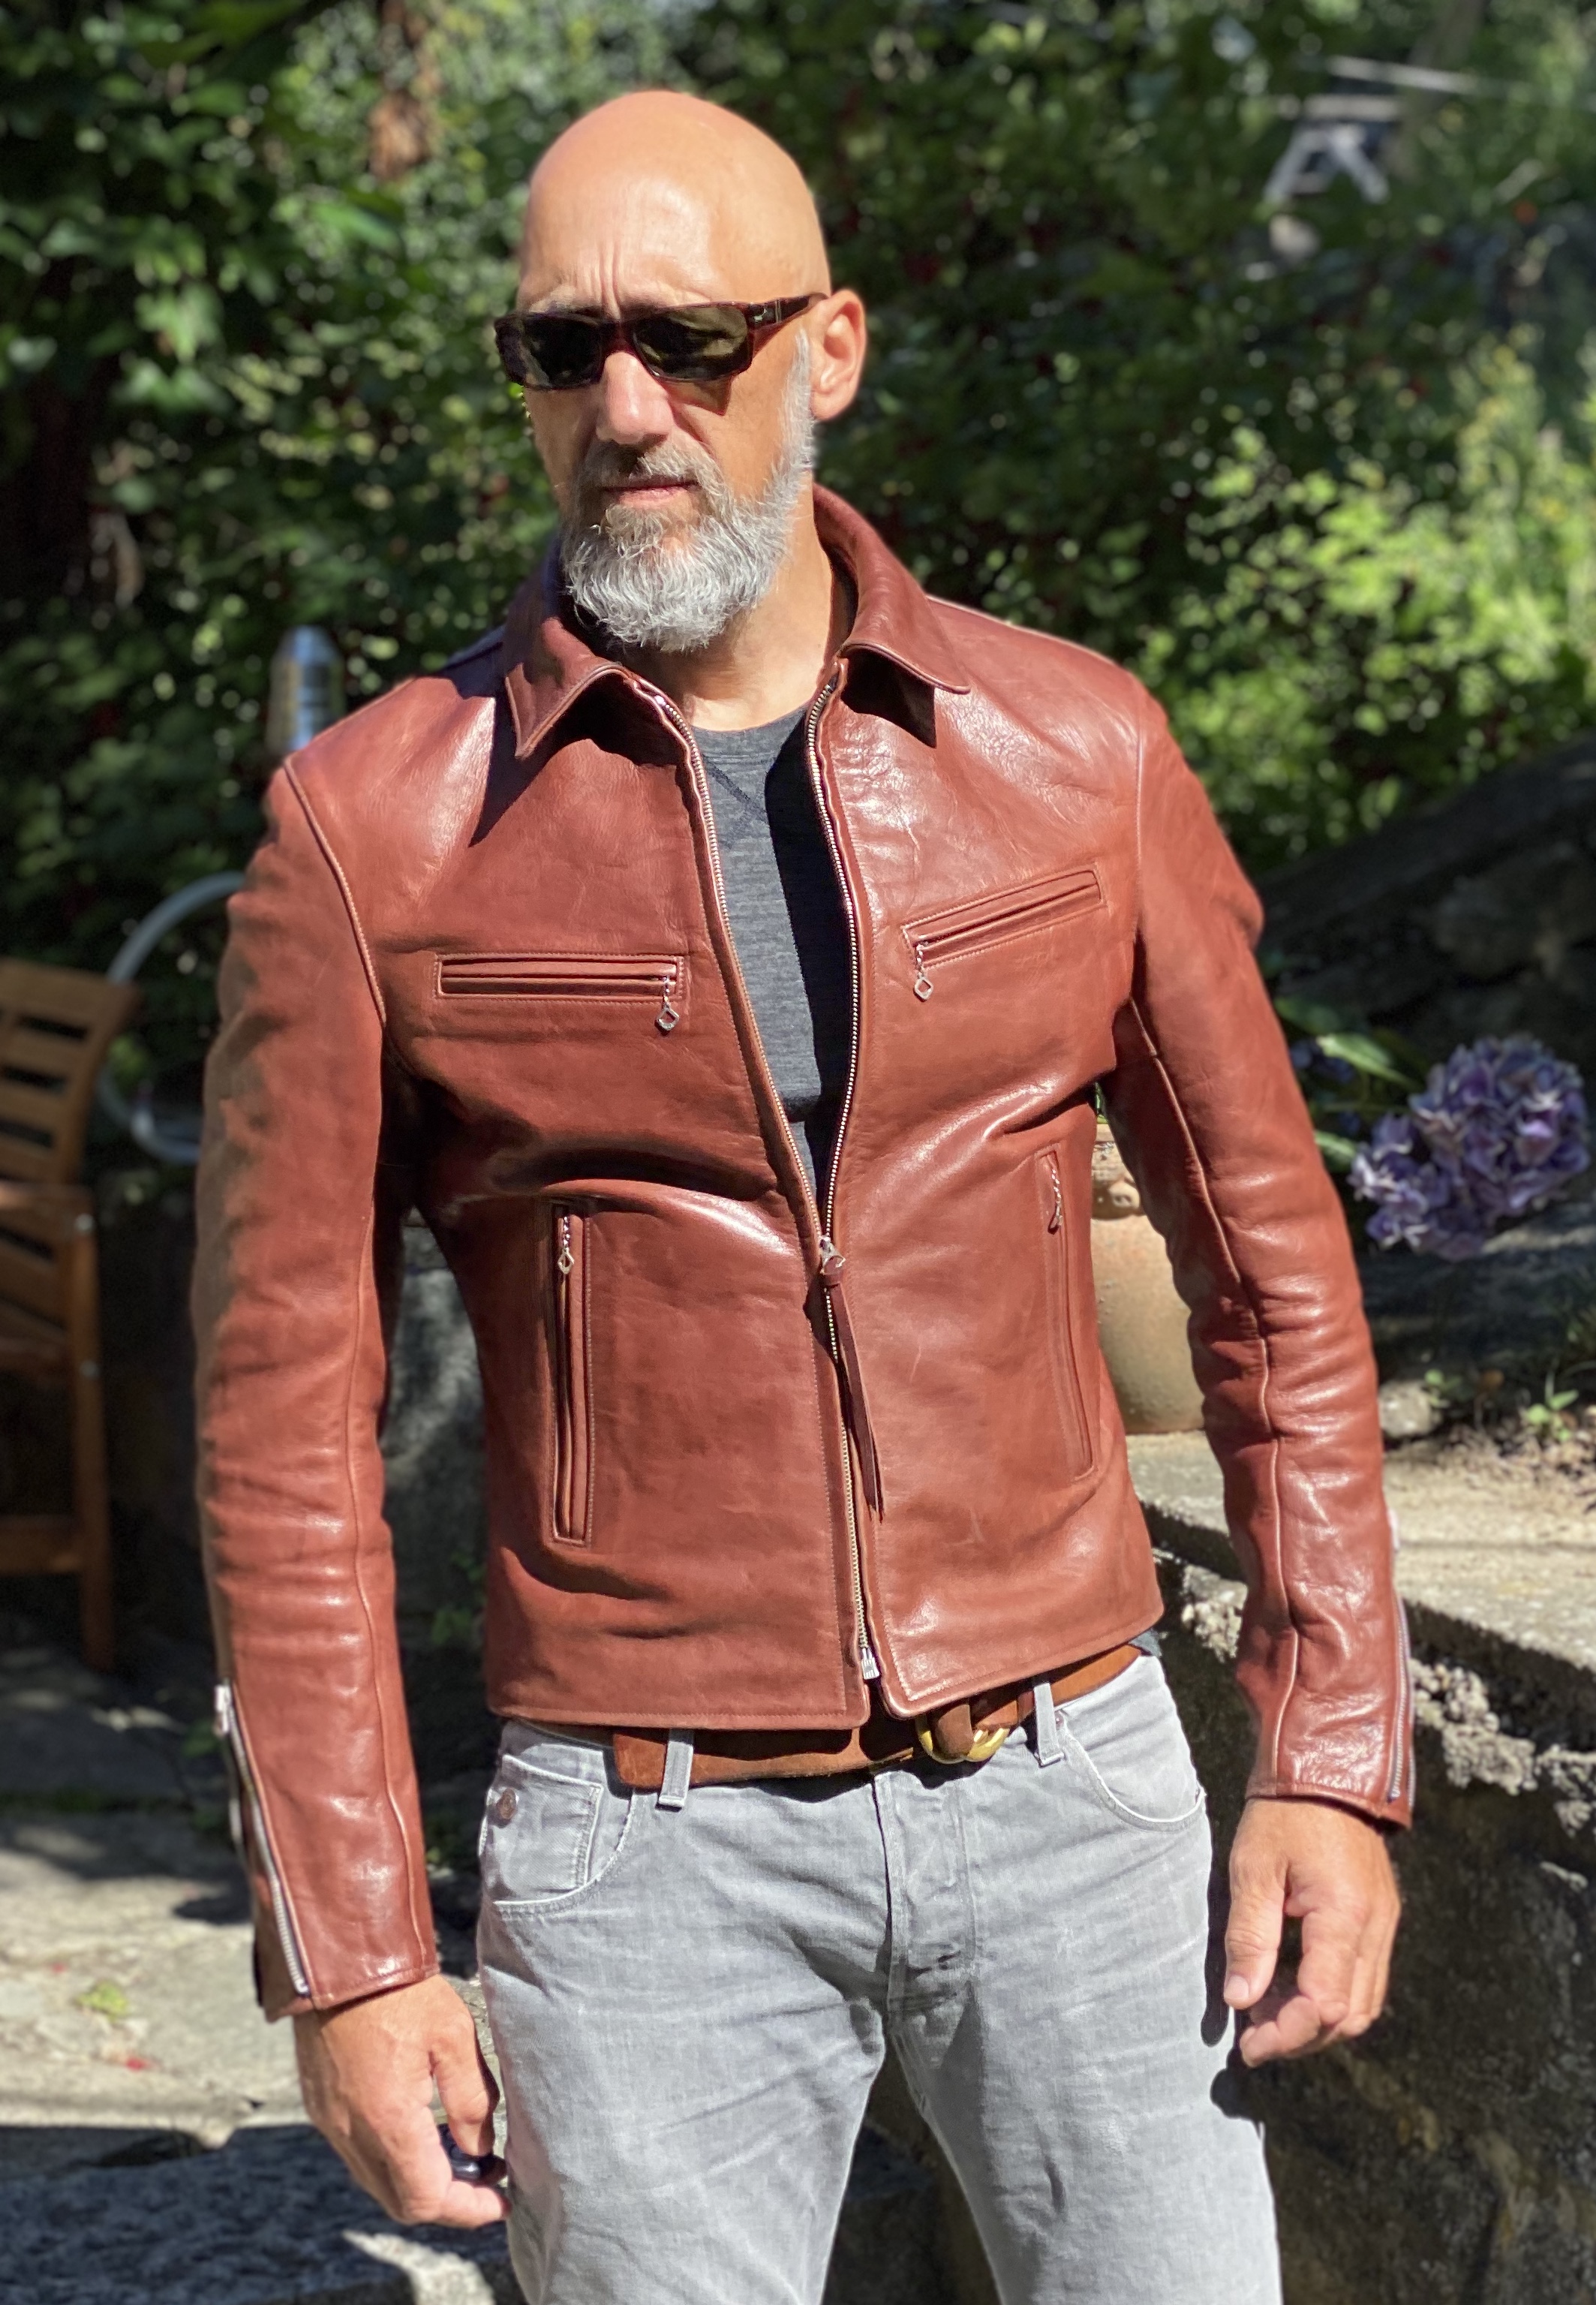 Over 50 wearing leather jackets | Page 6 | The Fedora Lounge